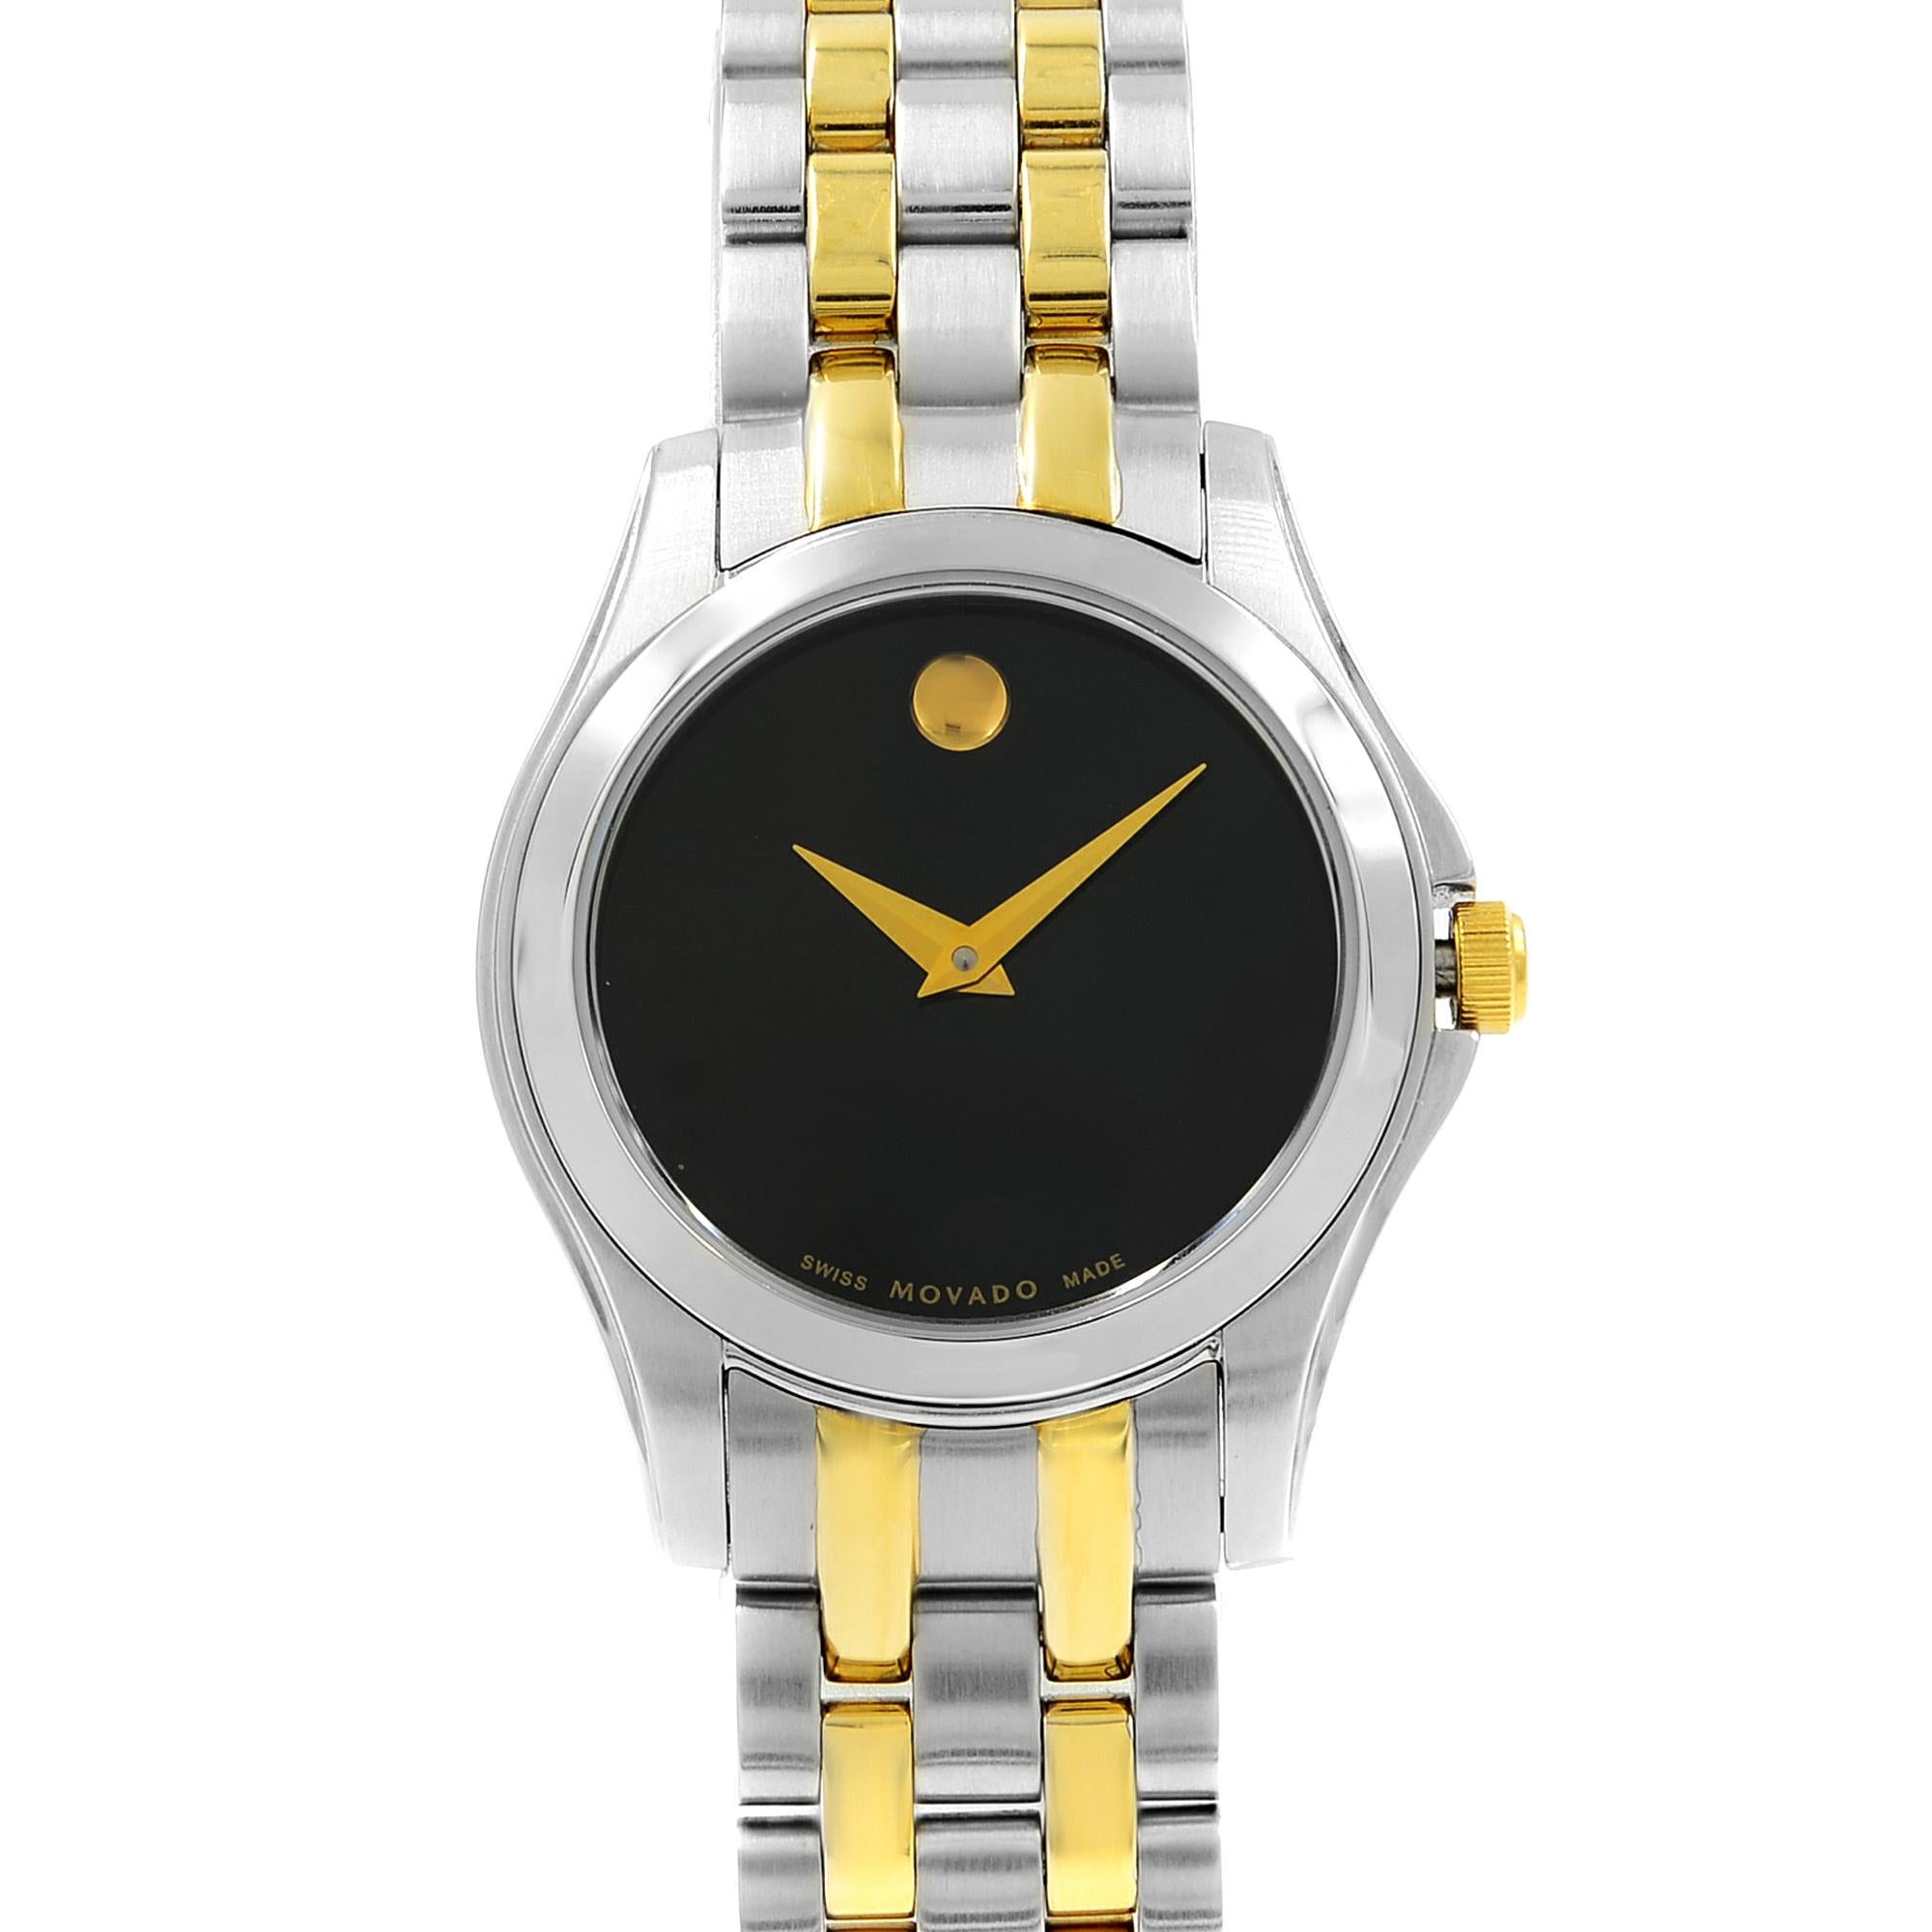 This display model Movado Corporate 0605976 is a beautiful Ladies timepiece that is powered by a quartz movement which is cased in a stainless steel case. It has a round shape face, no features dial and has hand unspecified style markers. It is